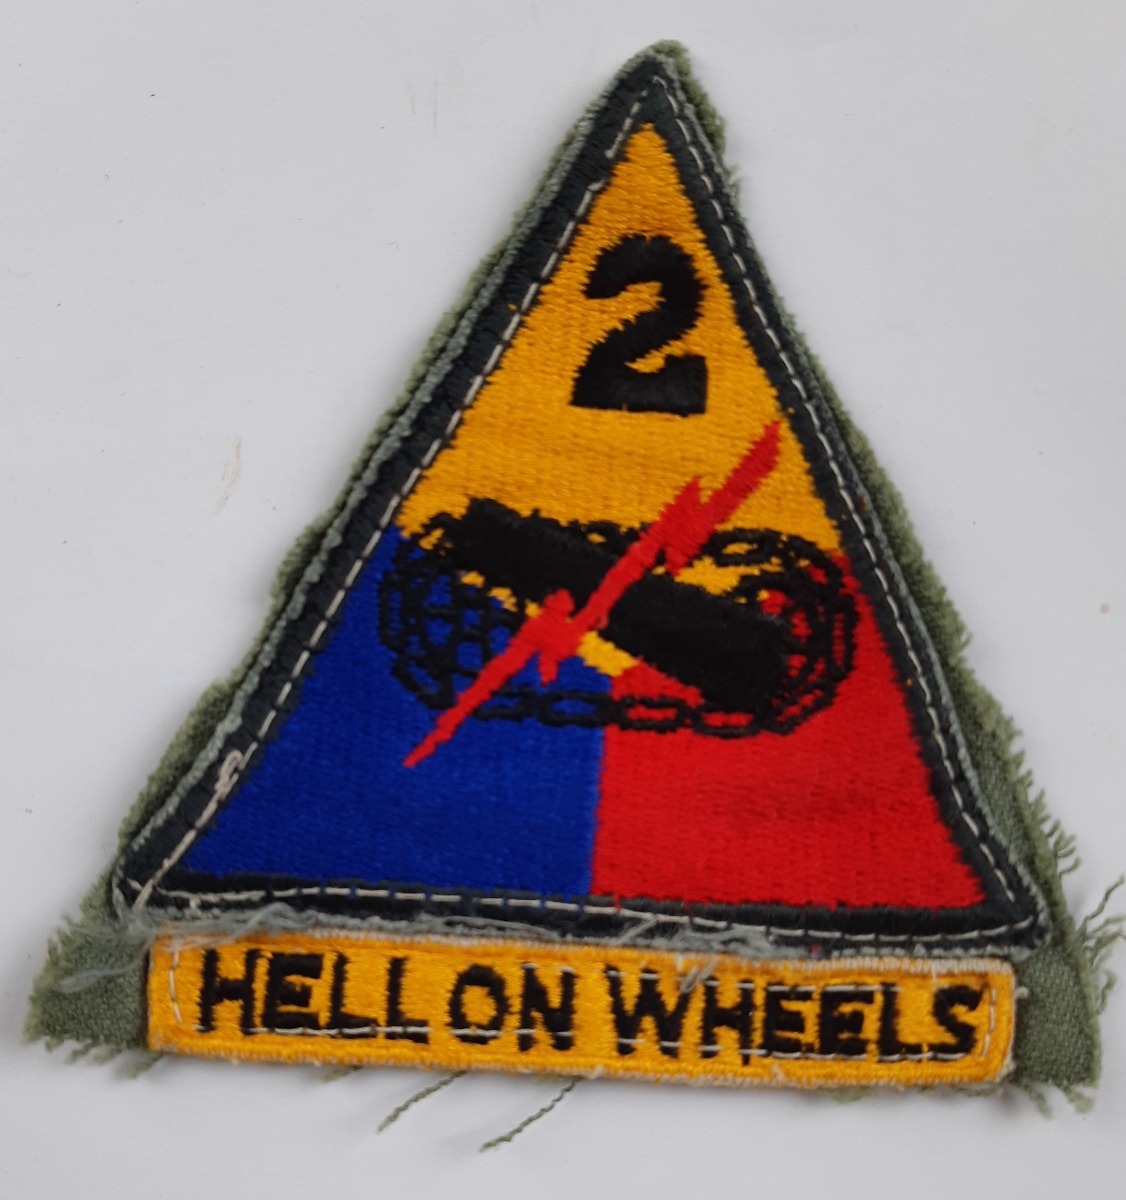 AMERICAN 2ND ARMOURED DIVISION PATCH WITH TAB ORIGINAL

